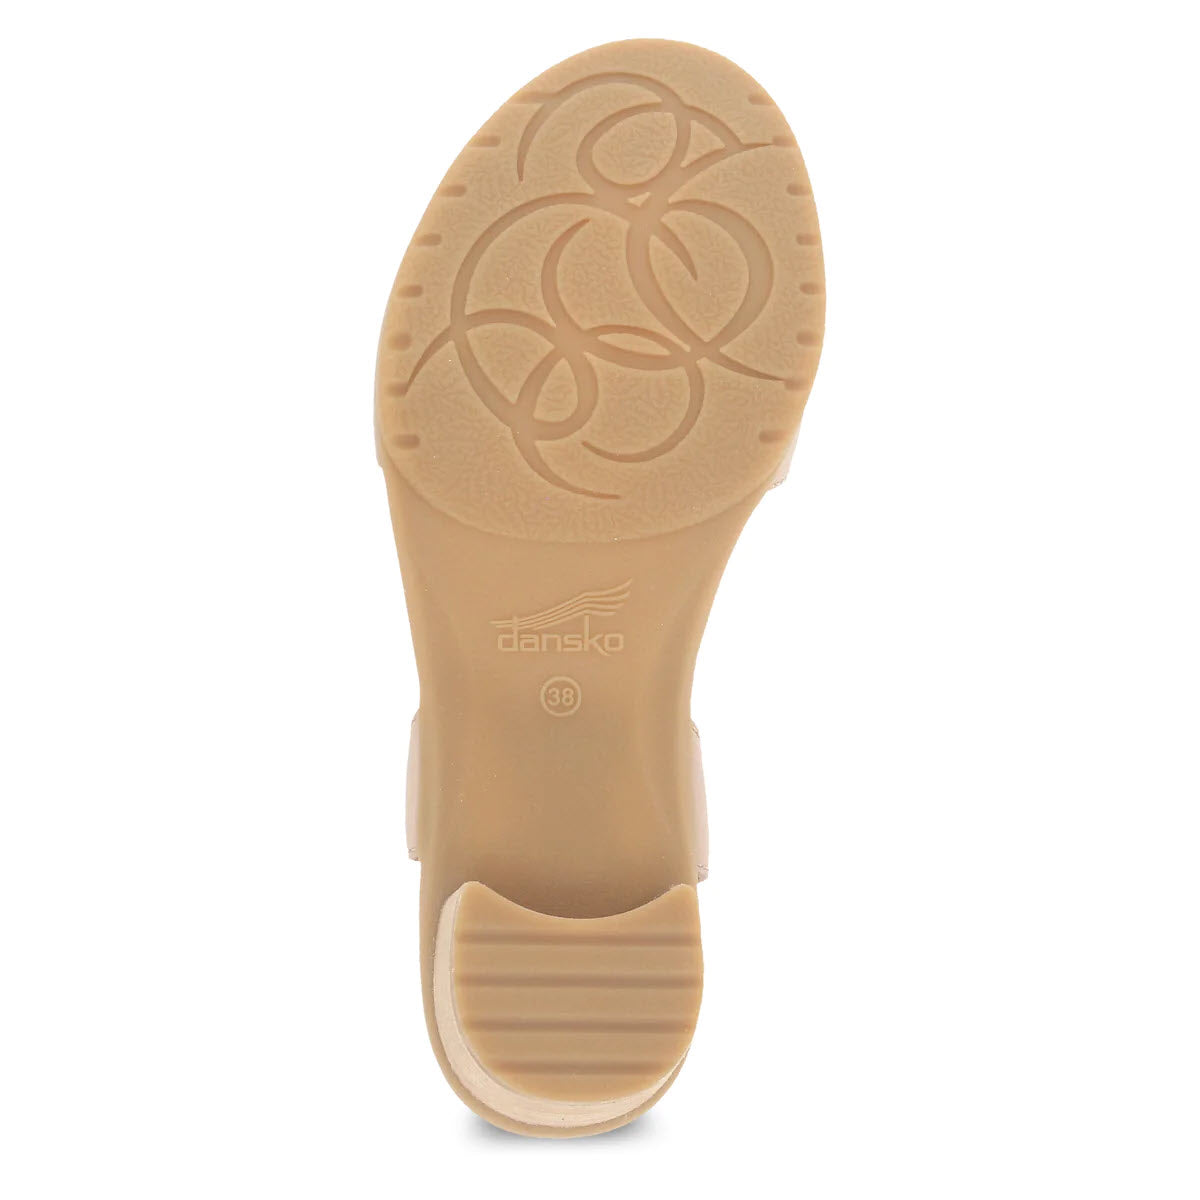 Bottom view of a comfortable beige Dansko Tessie Ballet clog showing the sole with a pattern of intertwined circles and the brand name embossed.